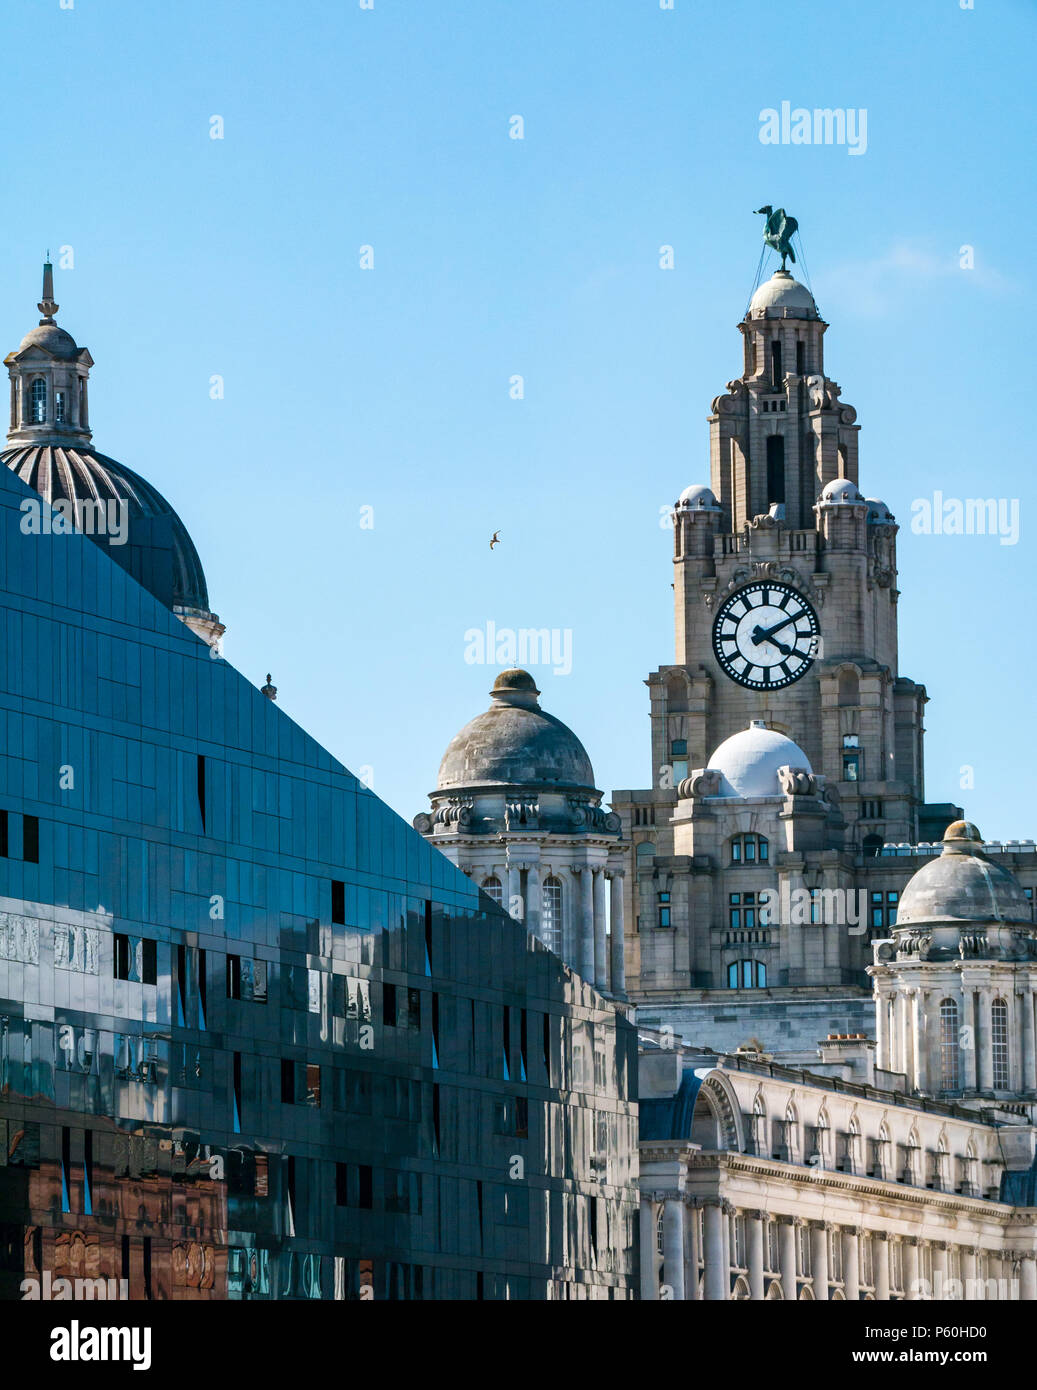 View of tower of Royal Liver building with UK largest clock and Liver bird, Pier Head, Liverpool, England, UK with modern glass building reflections Stock Photo